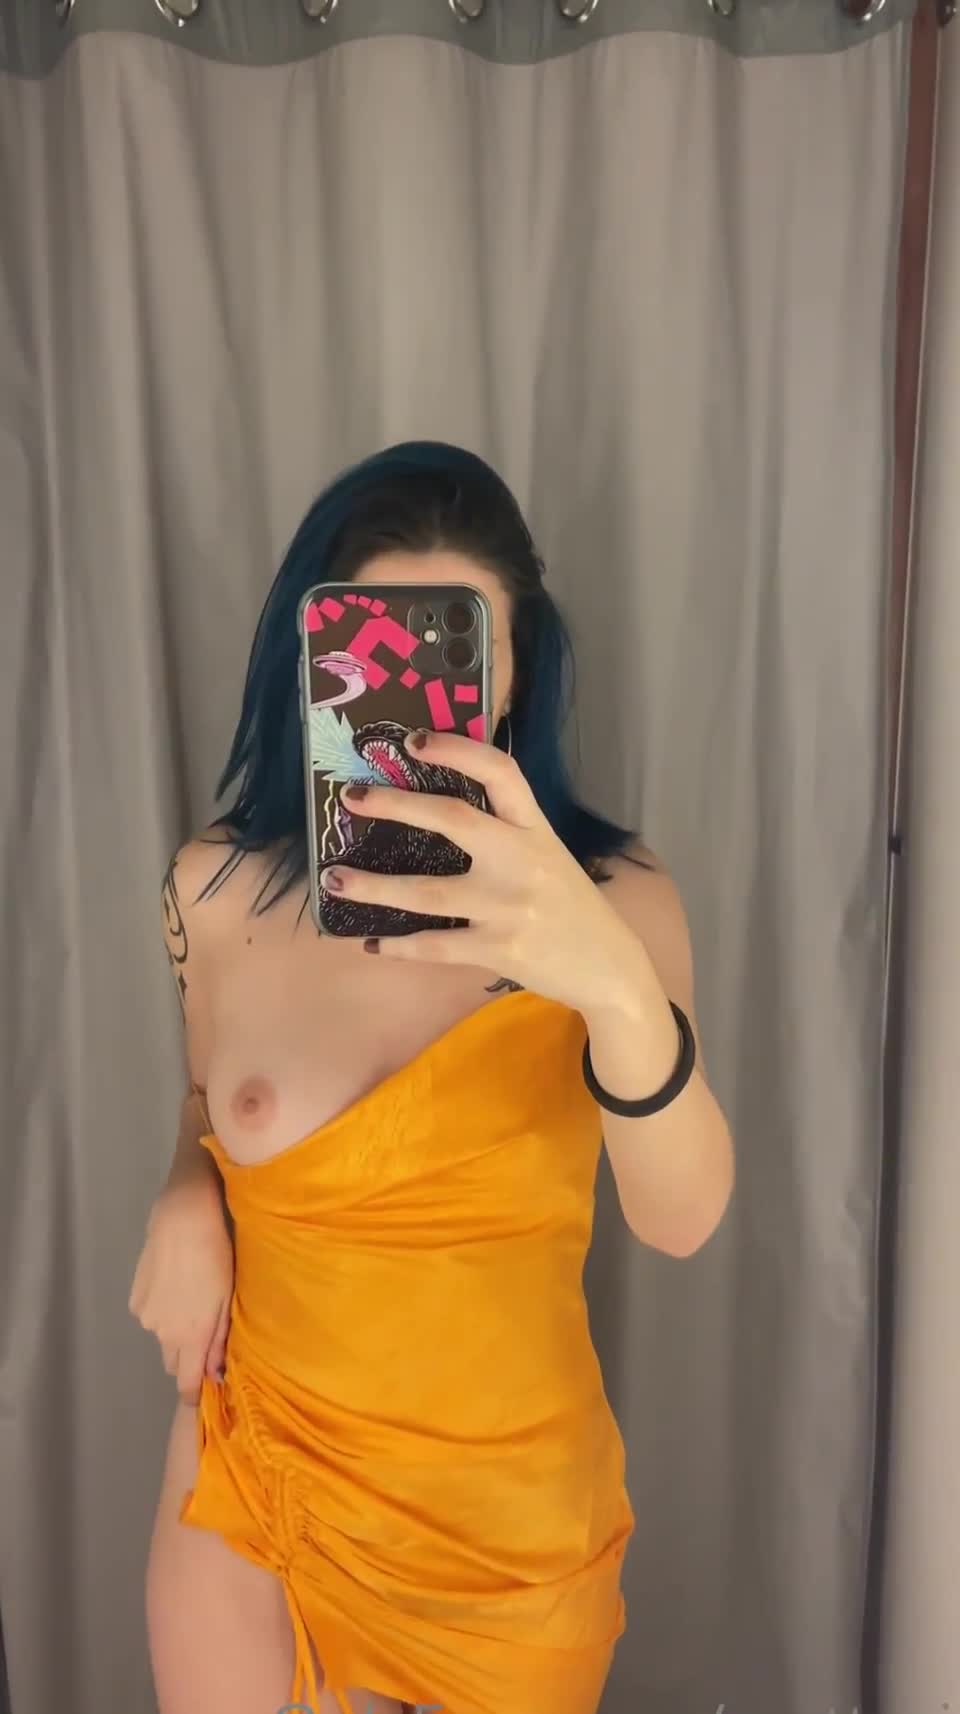 [f] Do you want to fuck me in this public fitting room? : video clip